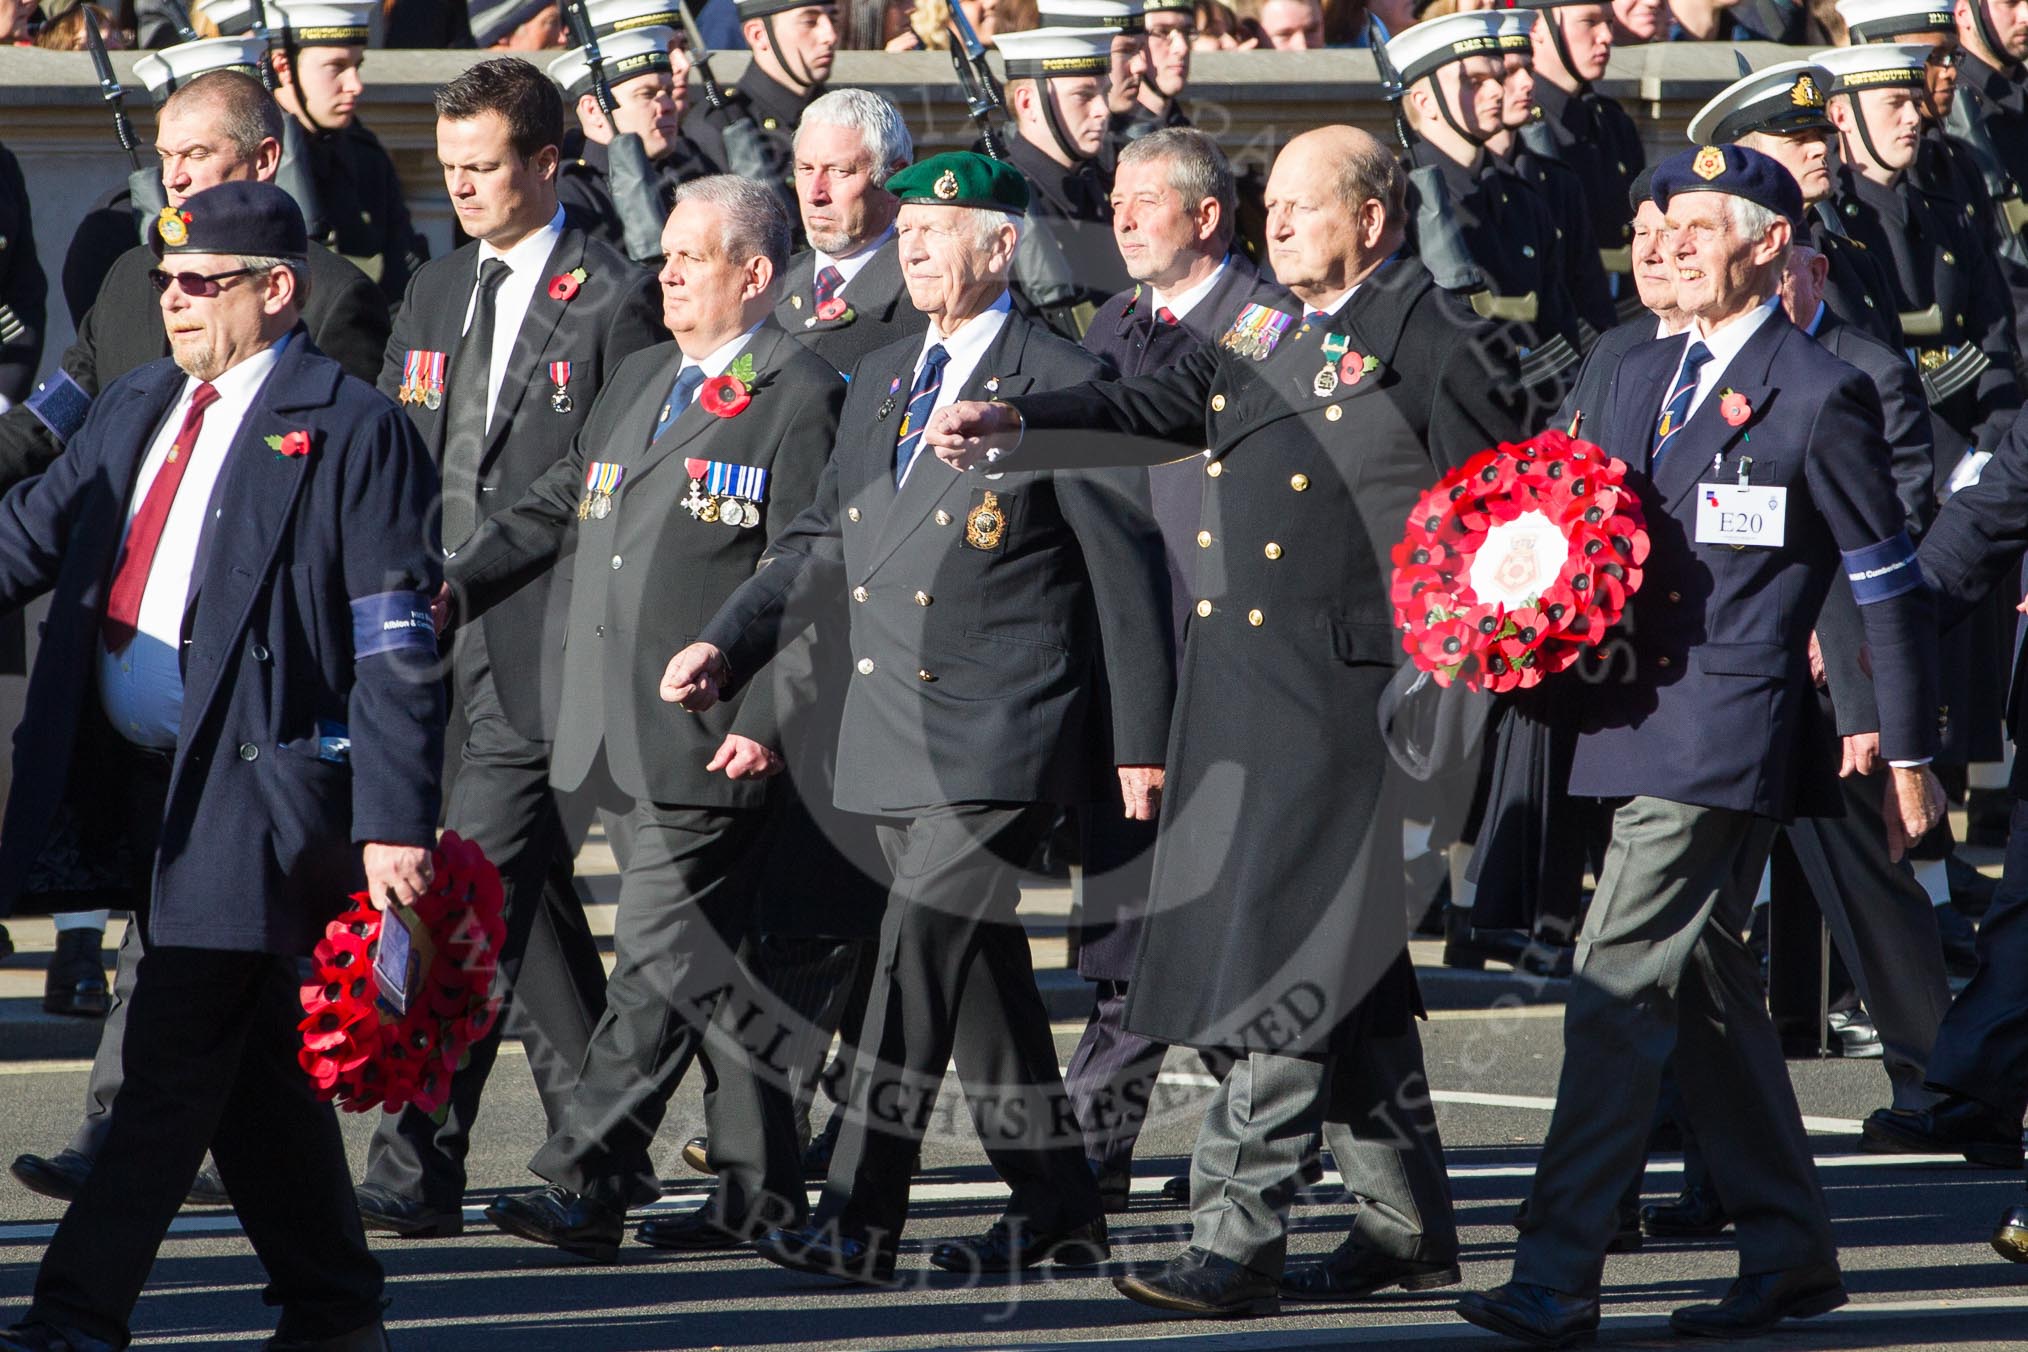 Remembrance Sunday 2012 Cenotaph March Past: Group E20 - HMS Cumberland Association..
Whitehall, Cenotaph,
London SW1,

United Kingdom,
on 11 November 2012 at 11:40, image #137